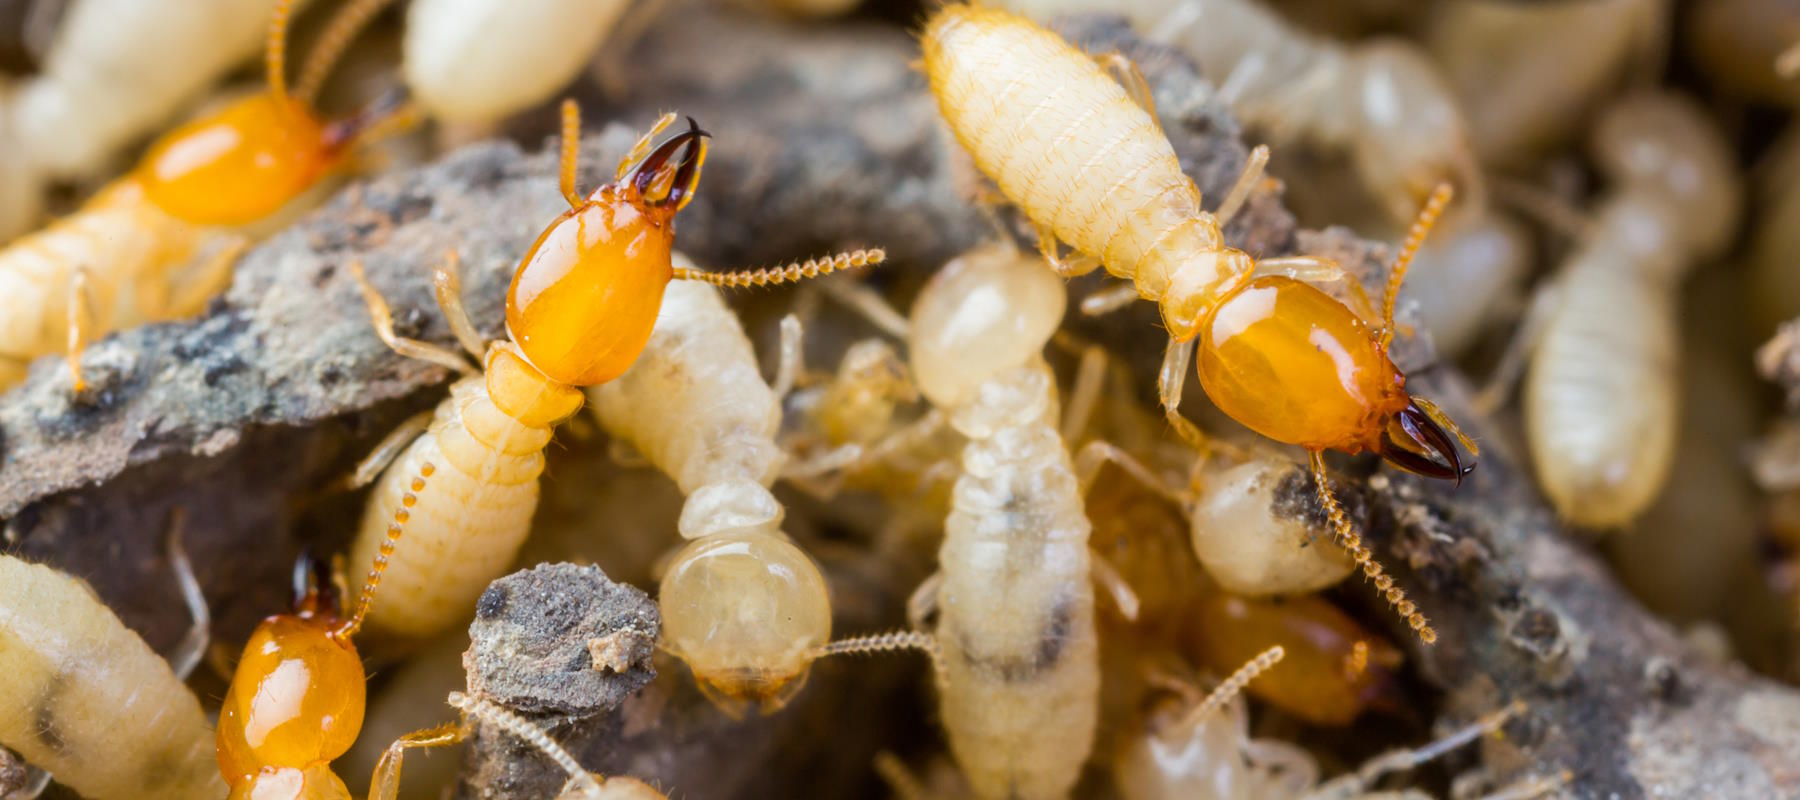 When are termites most active